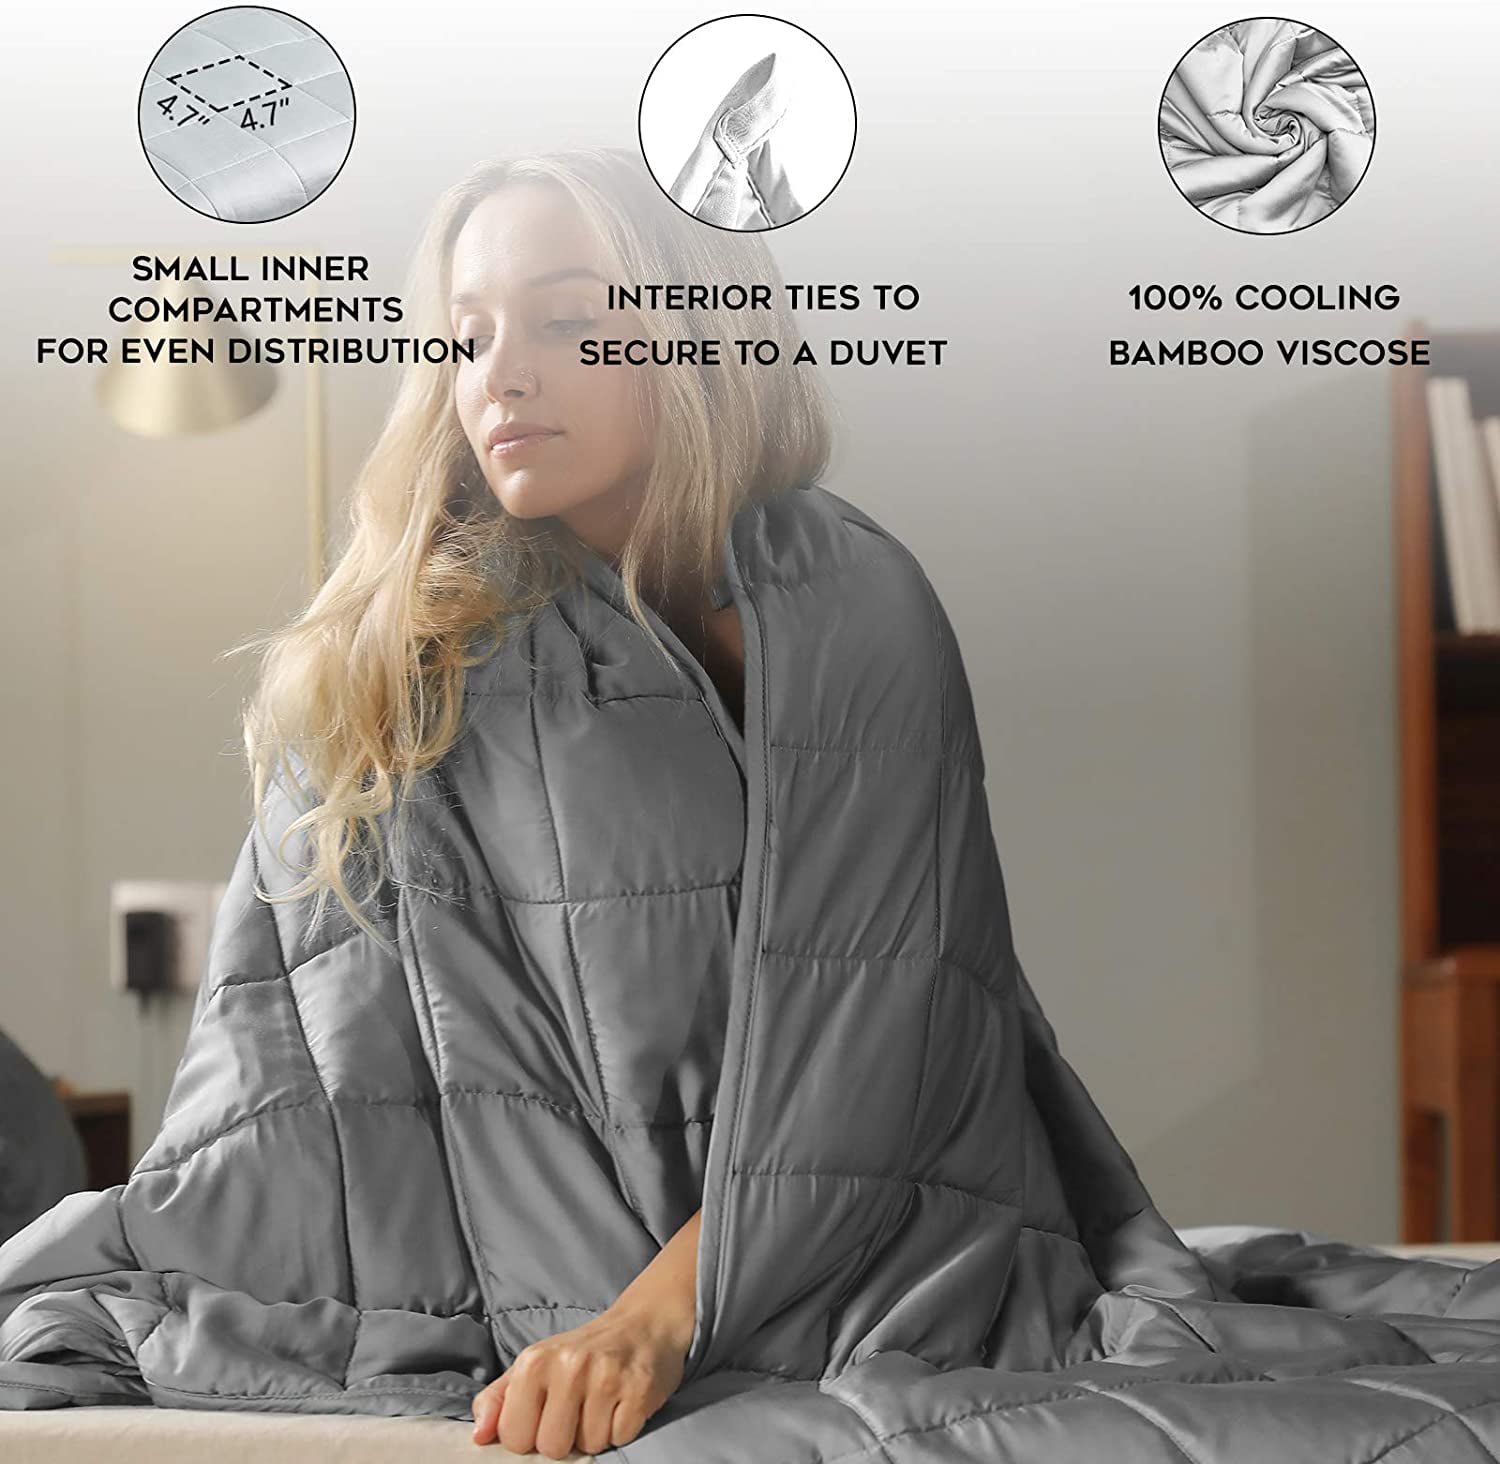 A Duvet Included White, 80x87 25lbs YnM Bamboo Weighted Blanket — Cooling Bamboo Oeko-Tex Certified Material with Premium Glass Beads 110~190lb Persons Sharing Use on Queen/King Bed